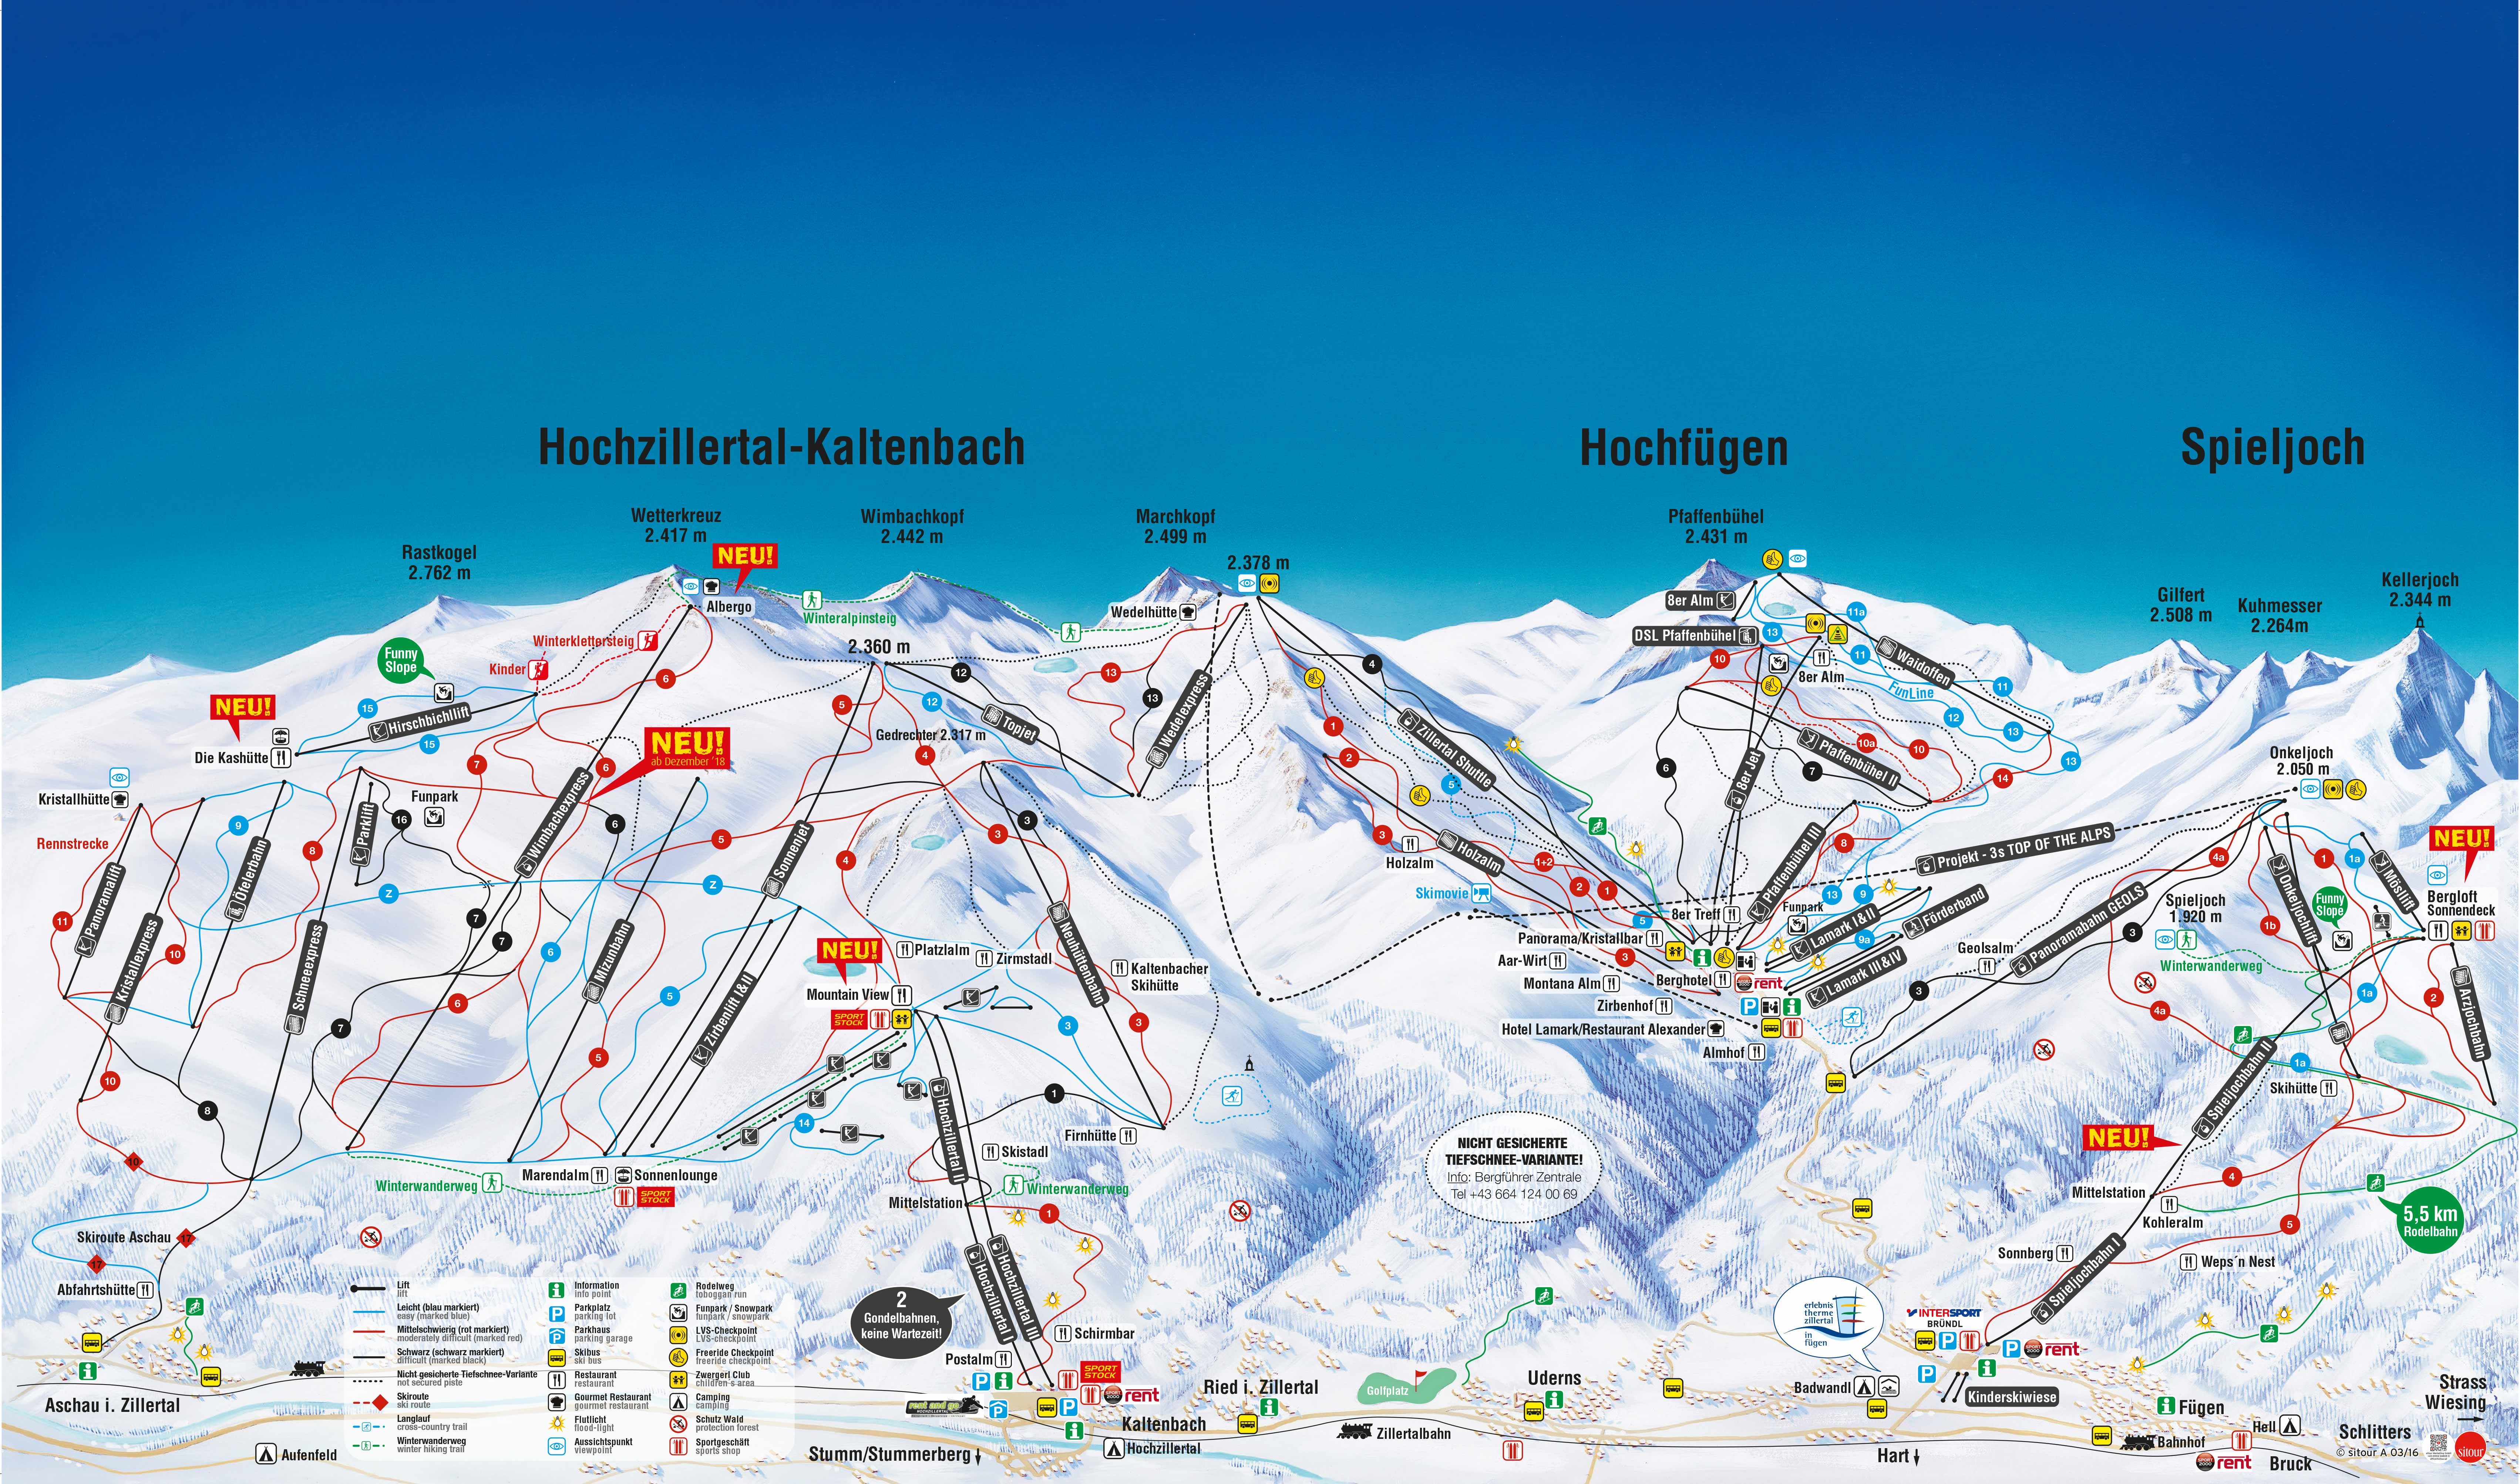 including proposed connection of Hochfuegen and Spieljoch skiing resorts